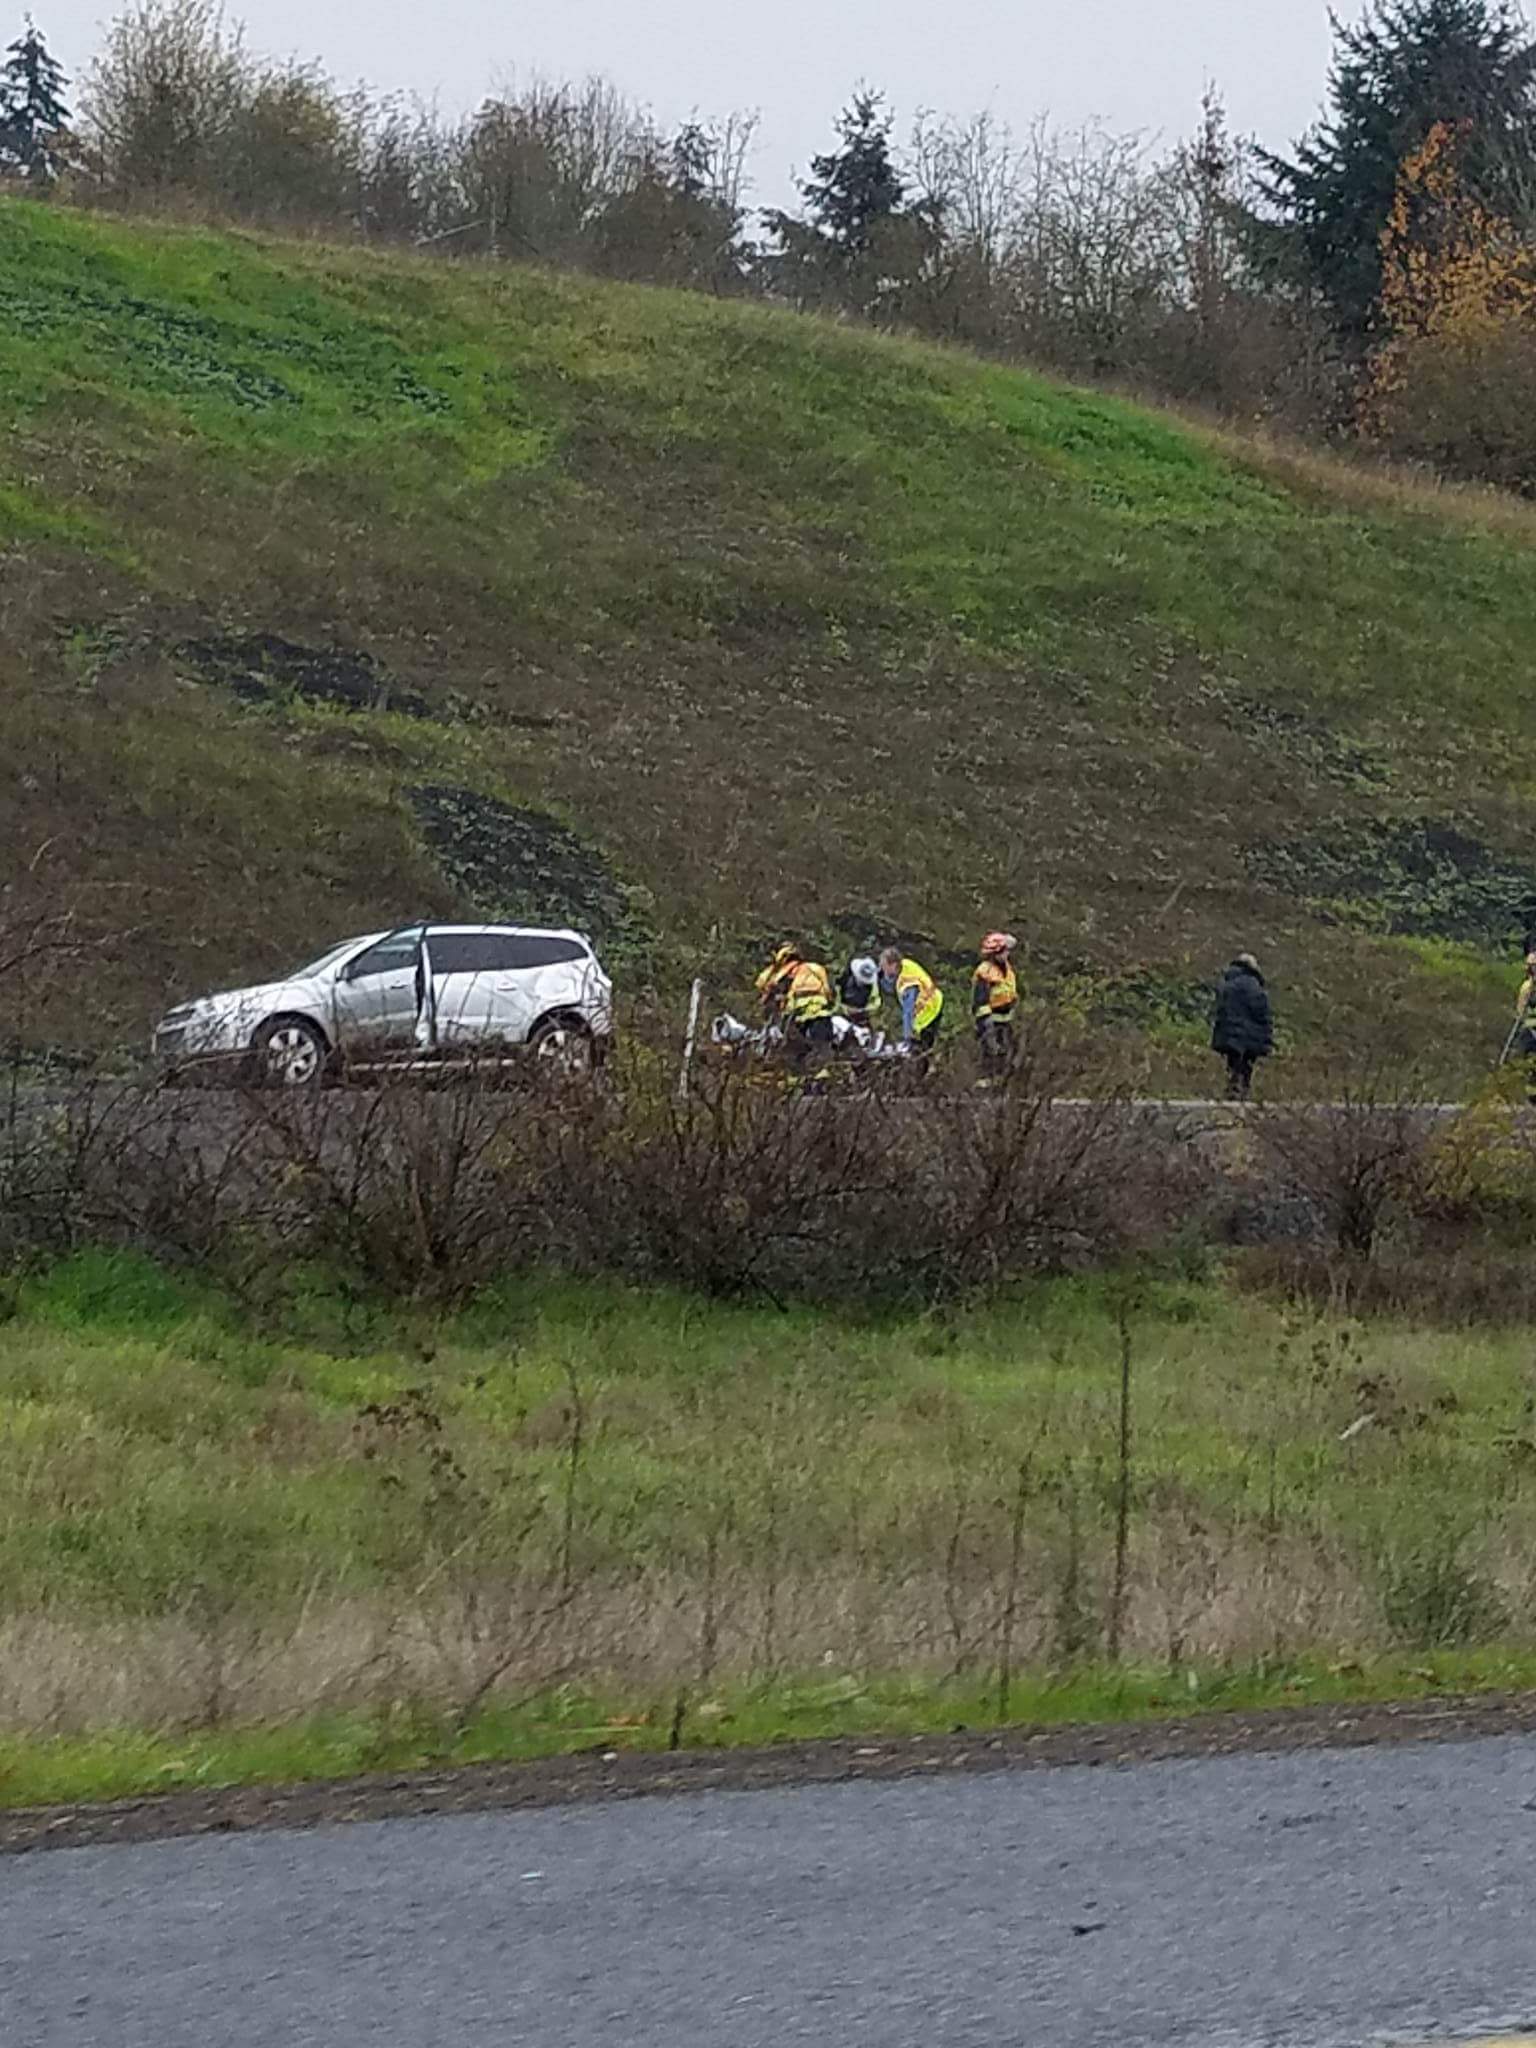 Two people were injured in a multiple-vehicle crash involving a school bus on Interstate 205 Friday afternoon. The school bus had about a dozen kids on board though none were reportedly injured.